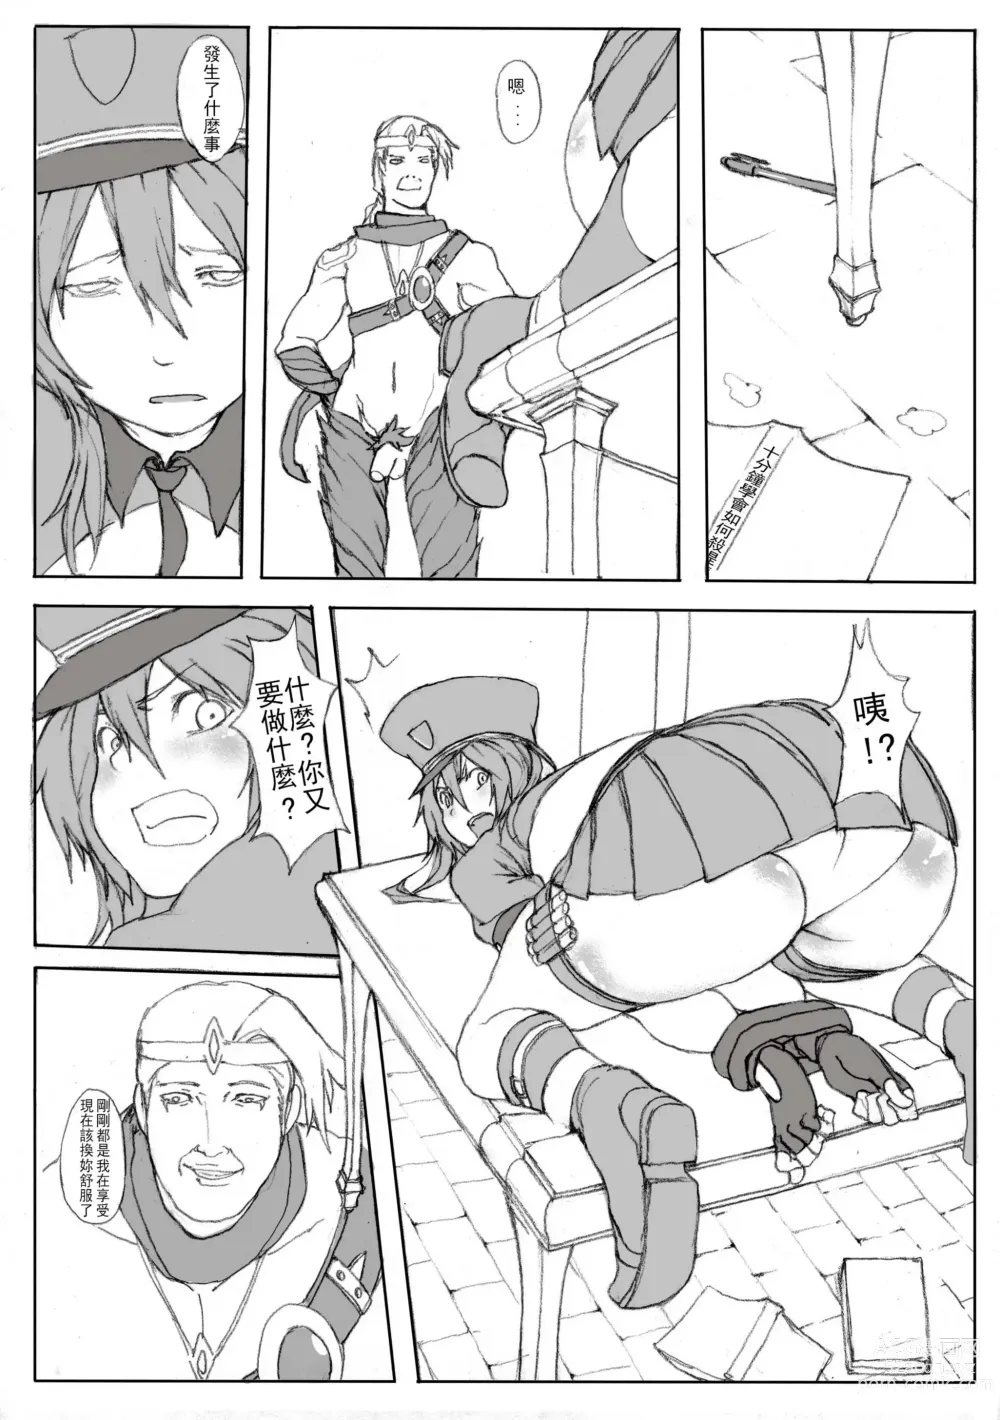 Page 11 of doujinshi 凱特琳壞壞 (League of Legends) [無修正]中文